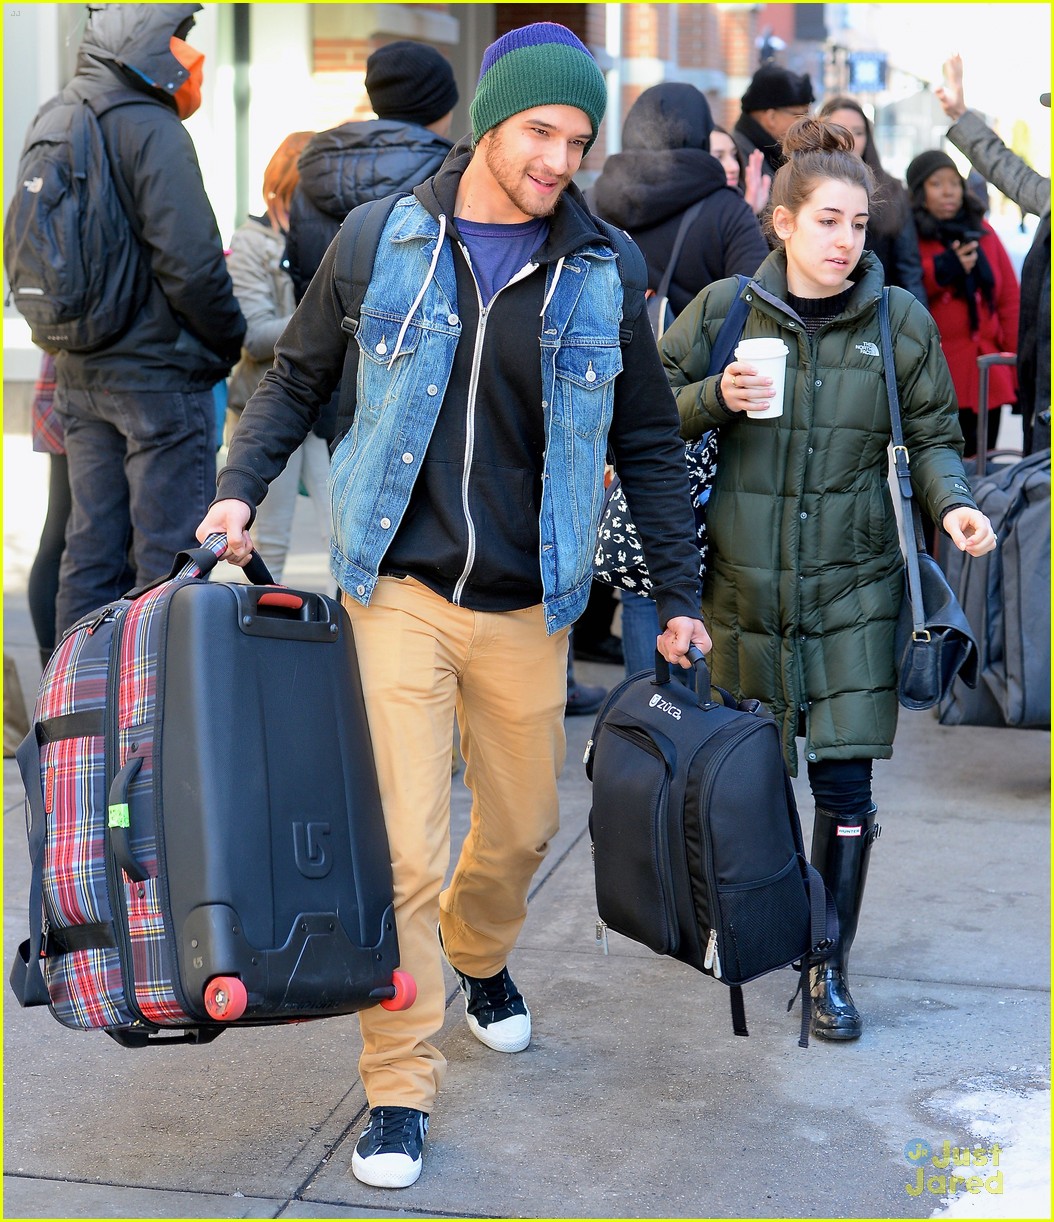 tyler posey tyler hoechlin nyc hotel check out 02